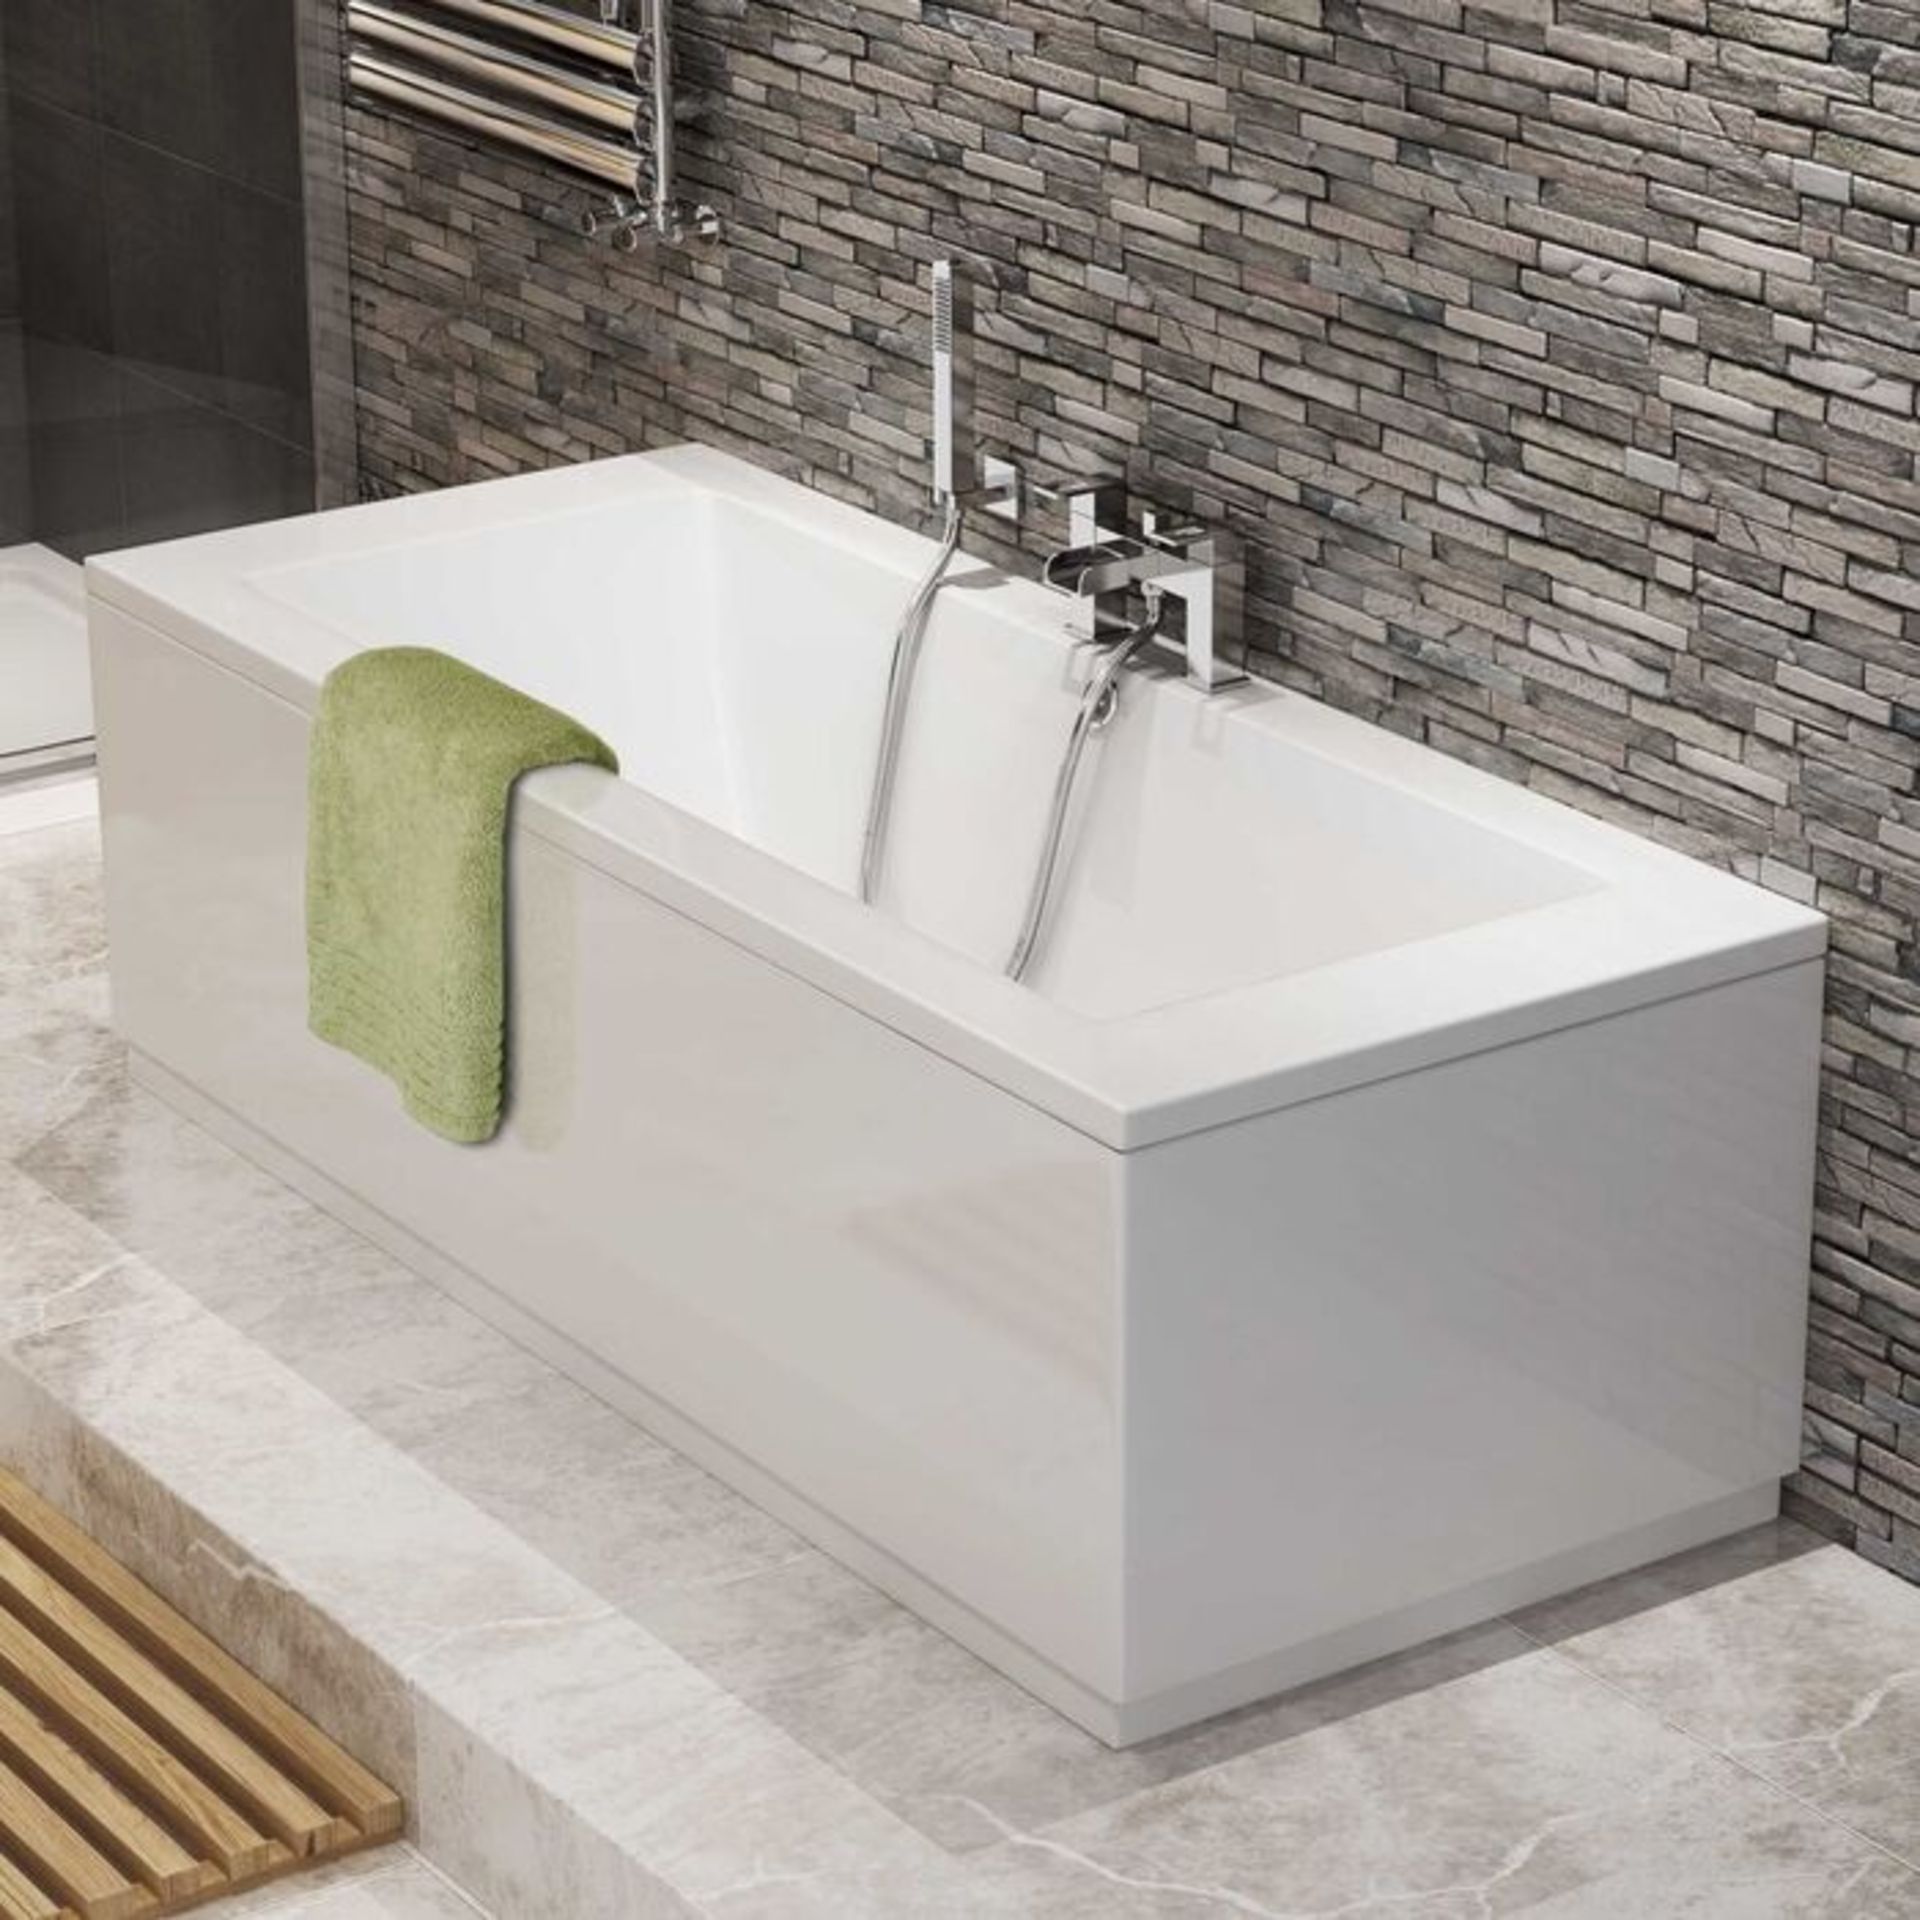 (PC100) 1800x800mm Built-in bath Double sided Rectangular. RRP £589.99 Made in the UK. reinfor...(